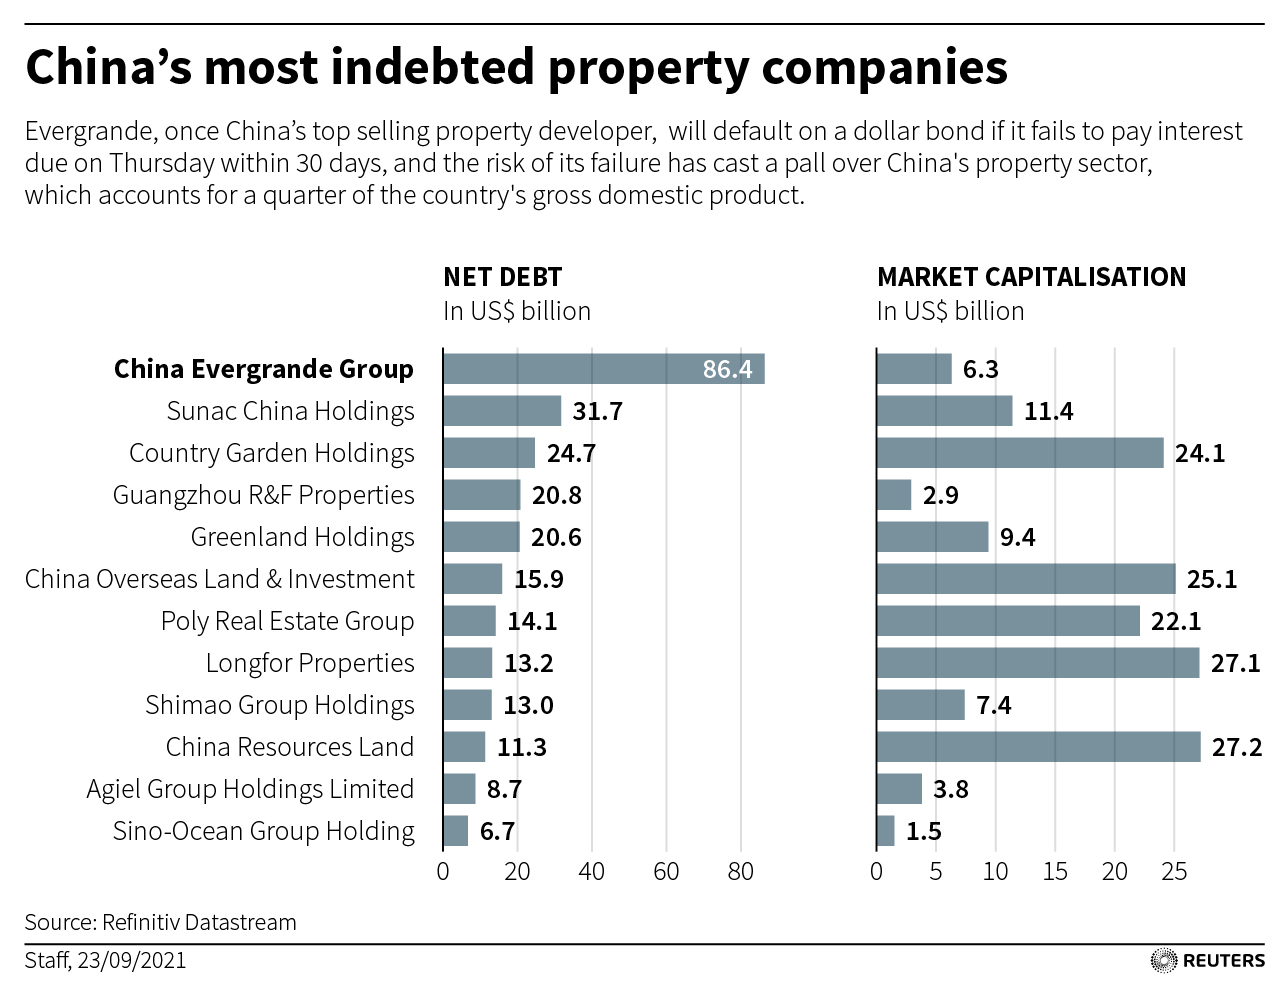 Charts showing the net debt and market capitalization of China's most indebted real estate companies